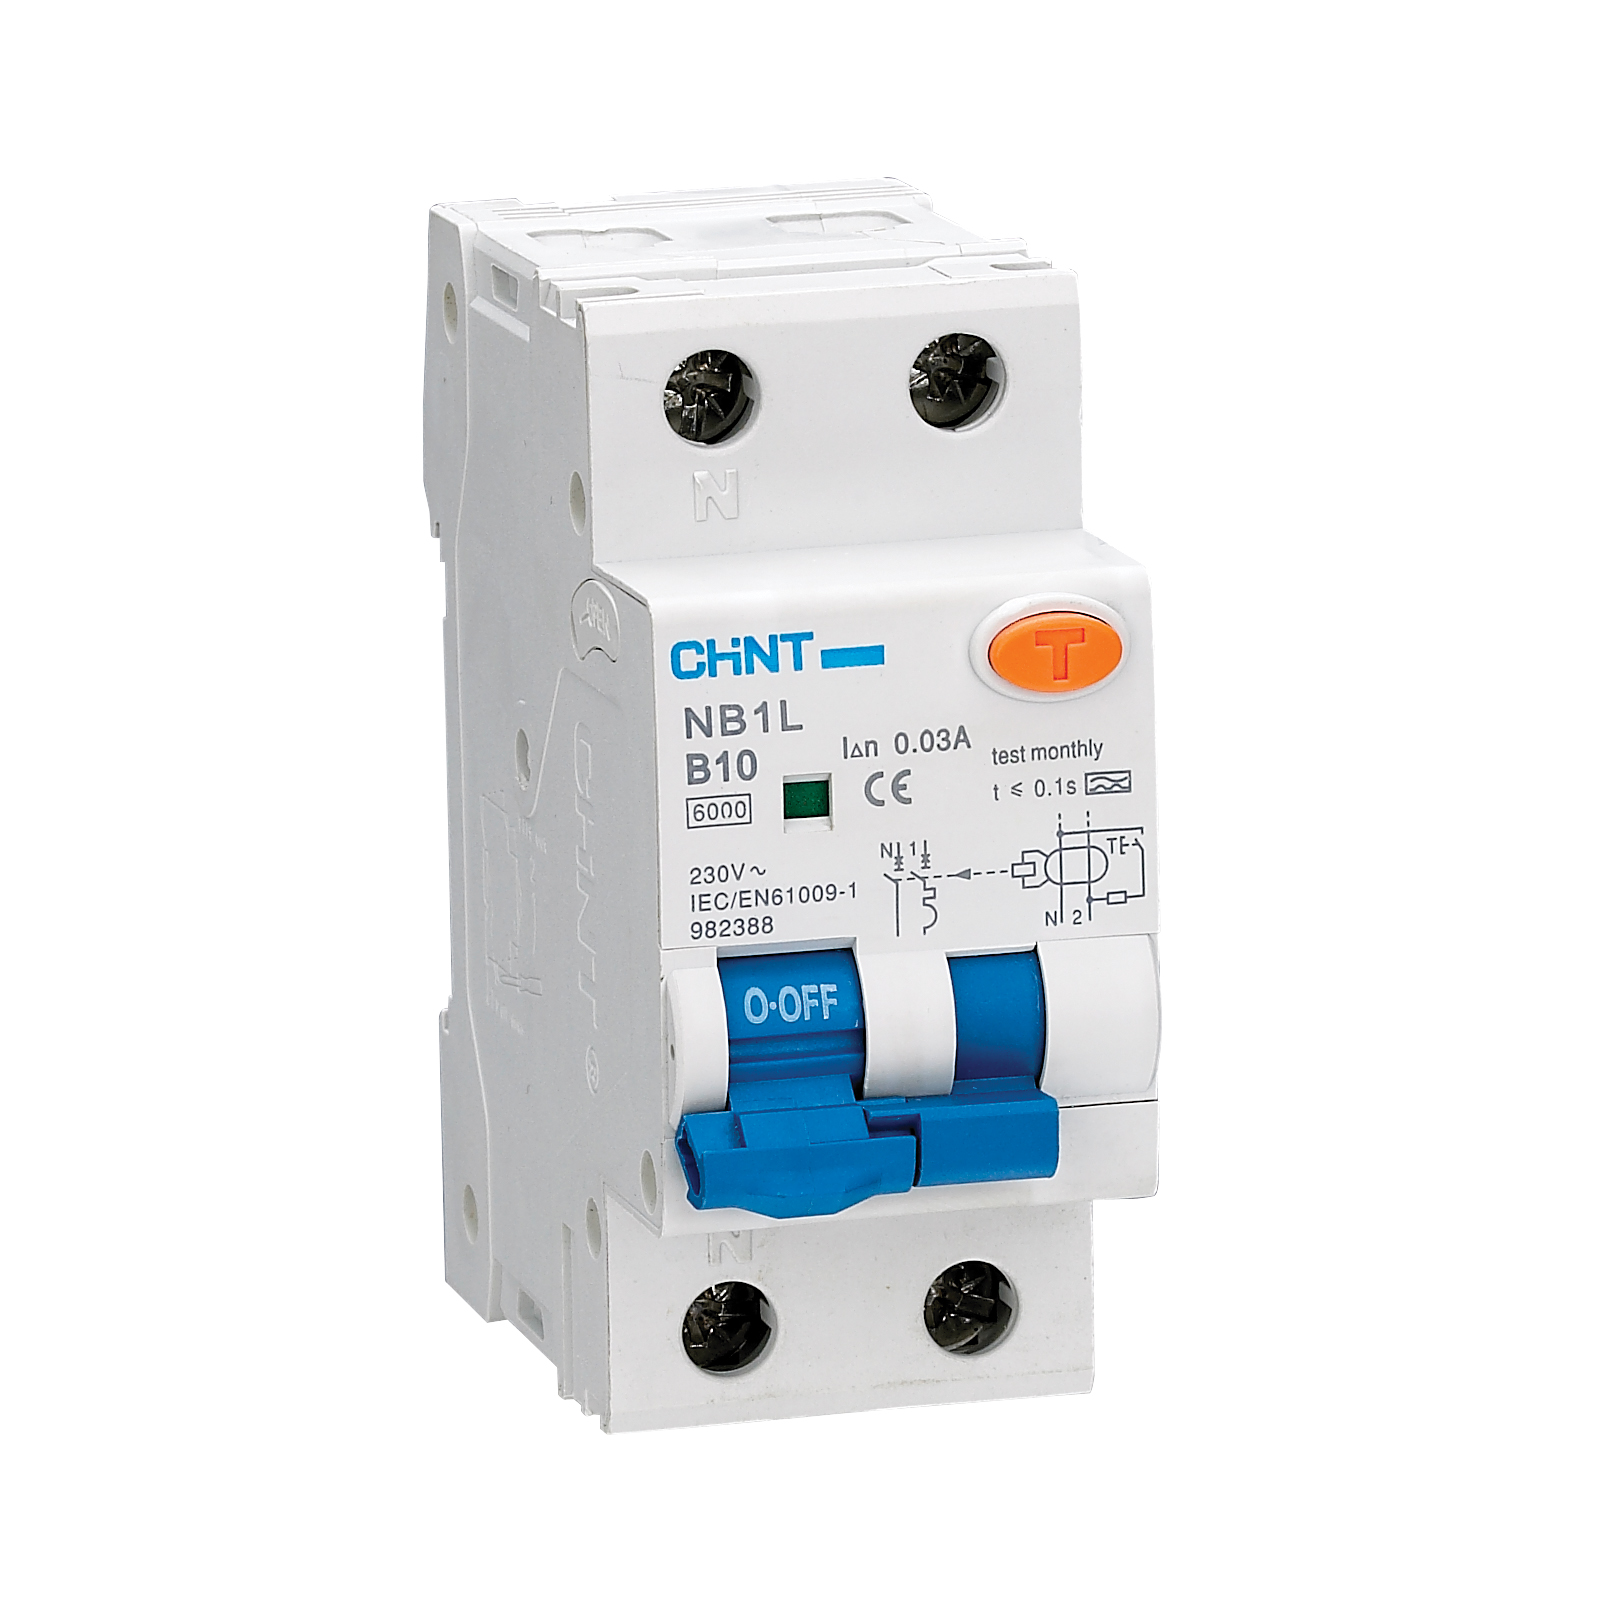 Residual Current Operated Circuit Breaker With Ver-current Protection (Magnetic), NB1L Series